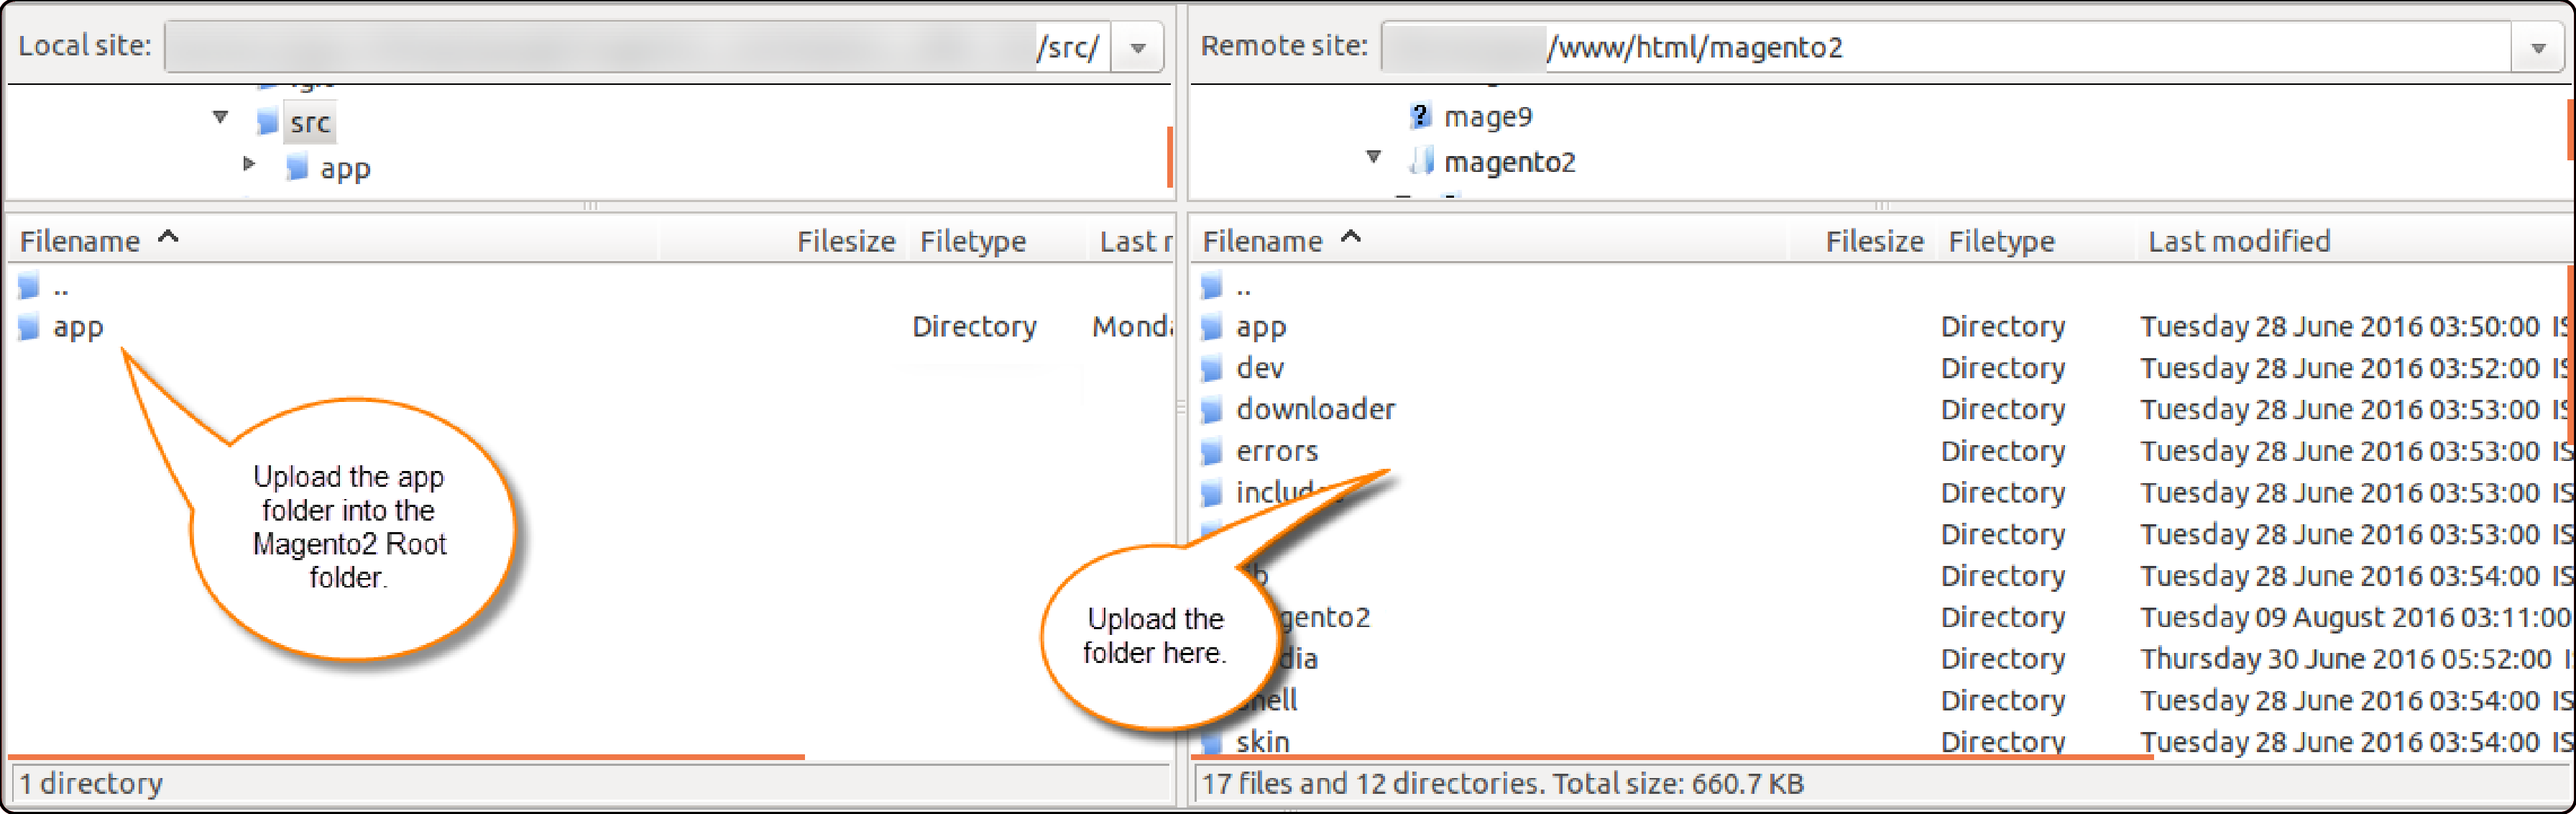 Uploading Magento 2 360 Product View zip file